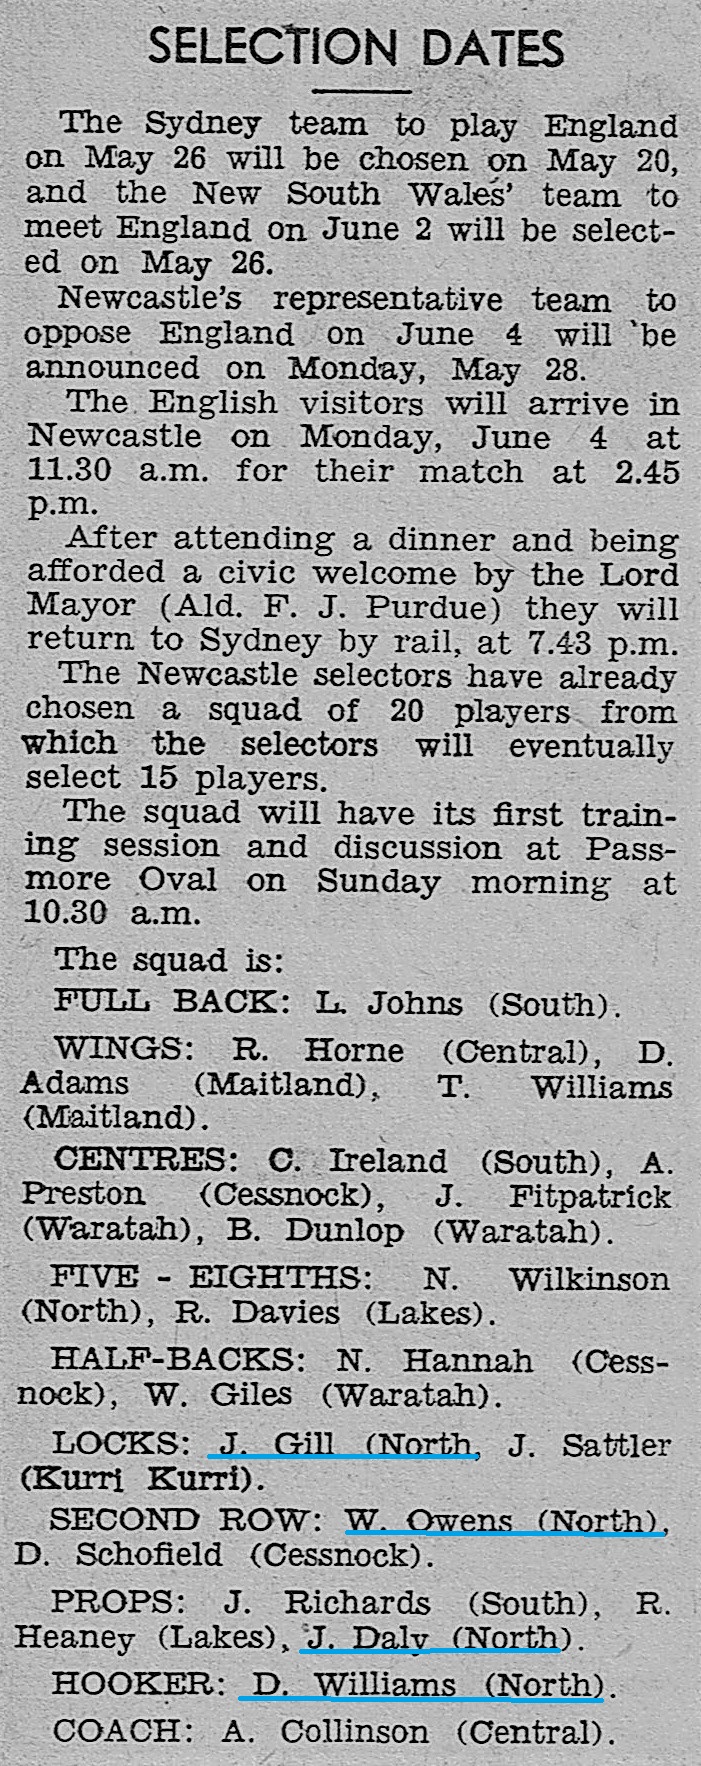 Newcastle Squad for England game 1962